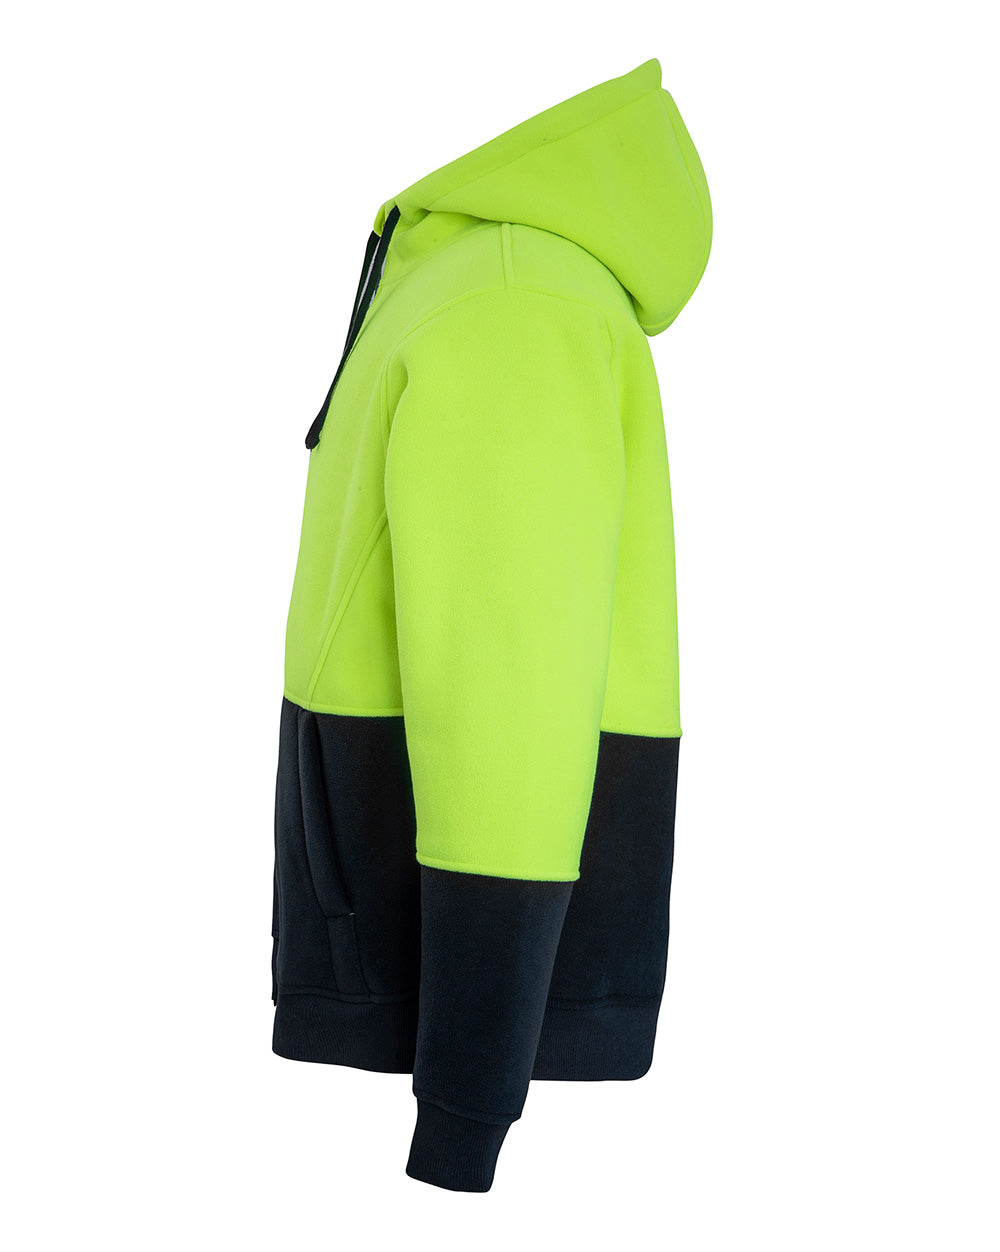 Taylor Hoodie in Fluoro Yellow & Navy